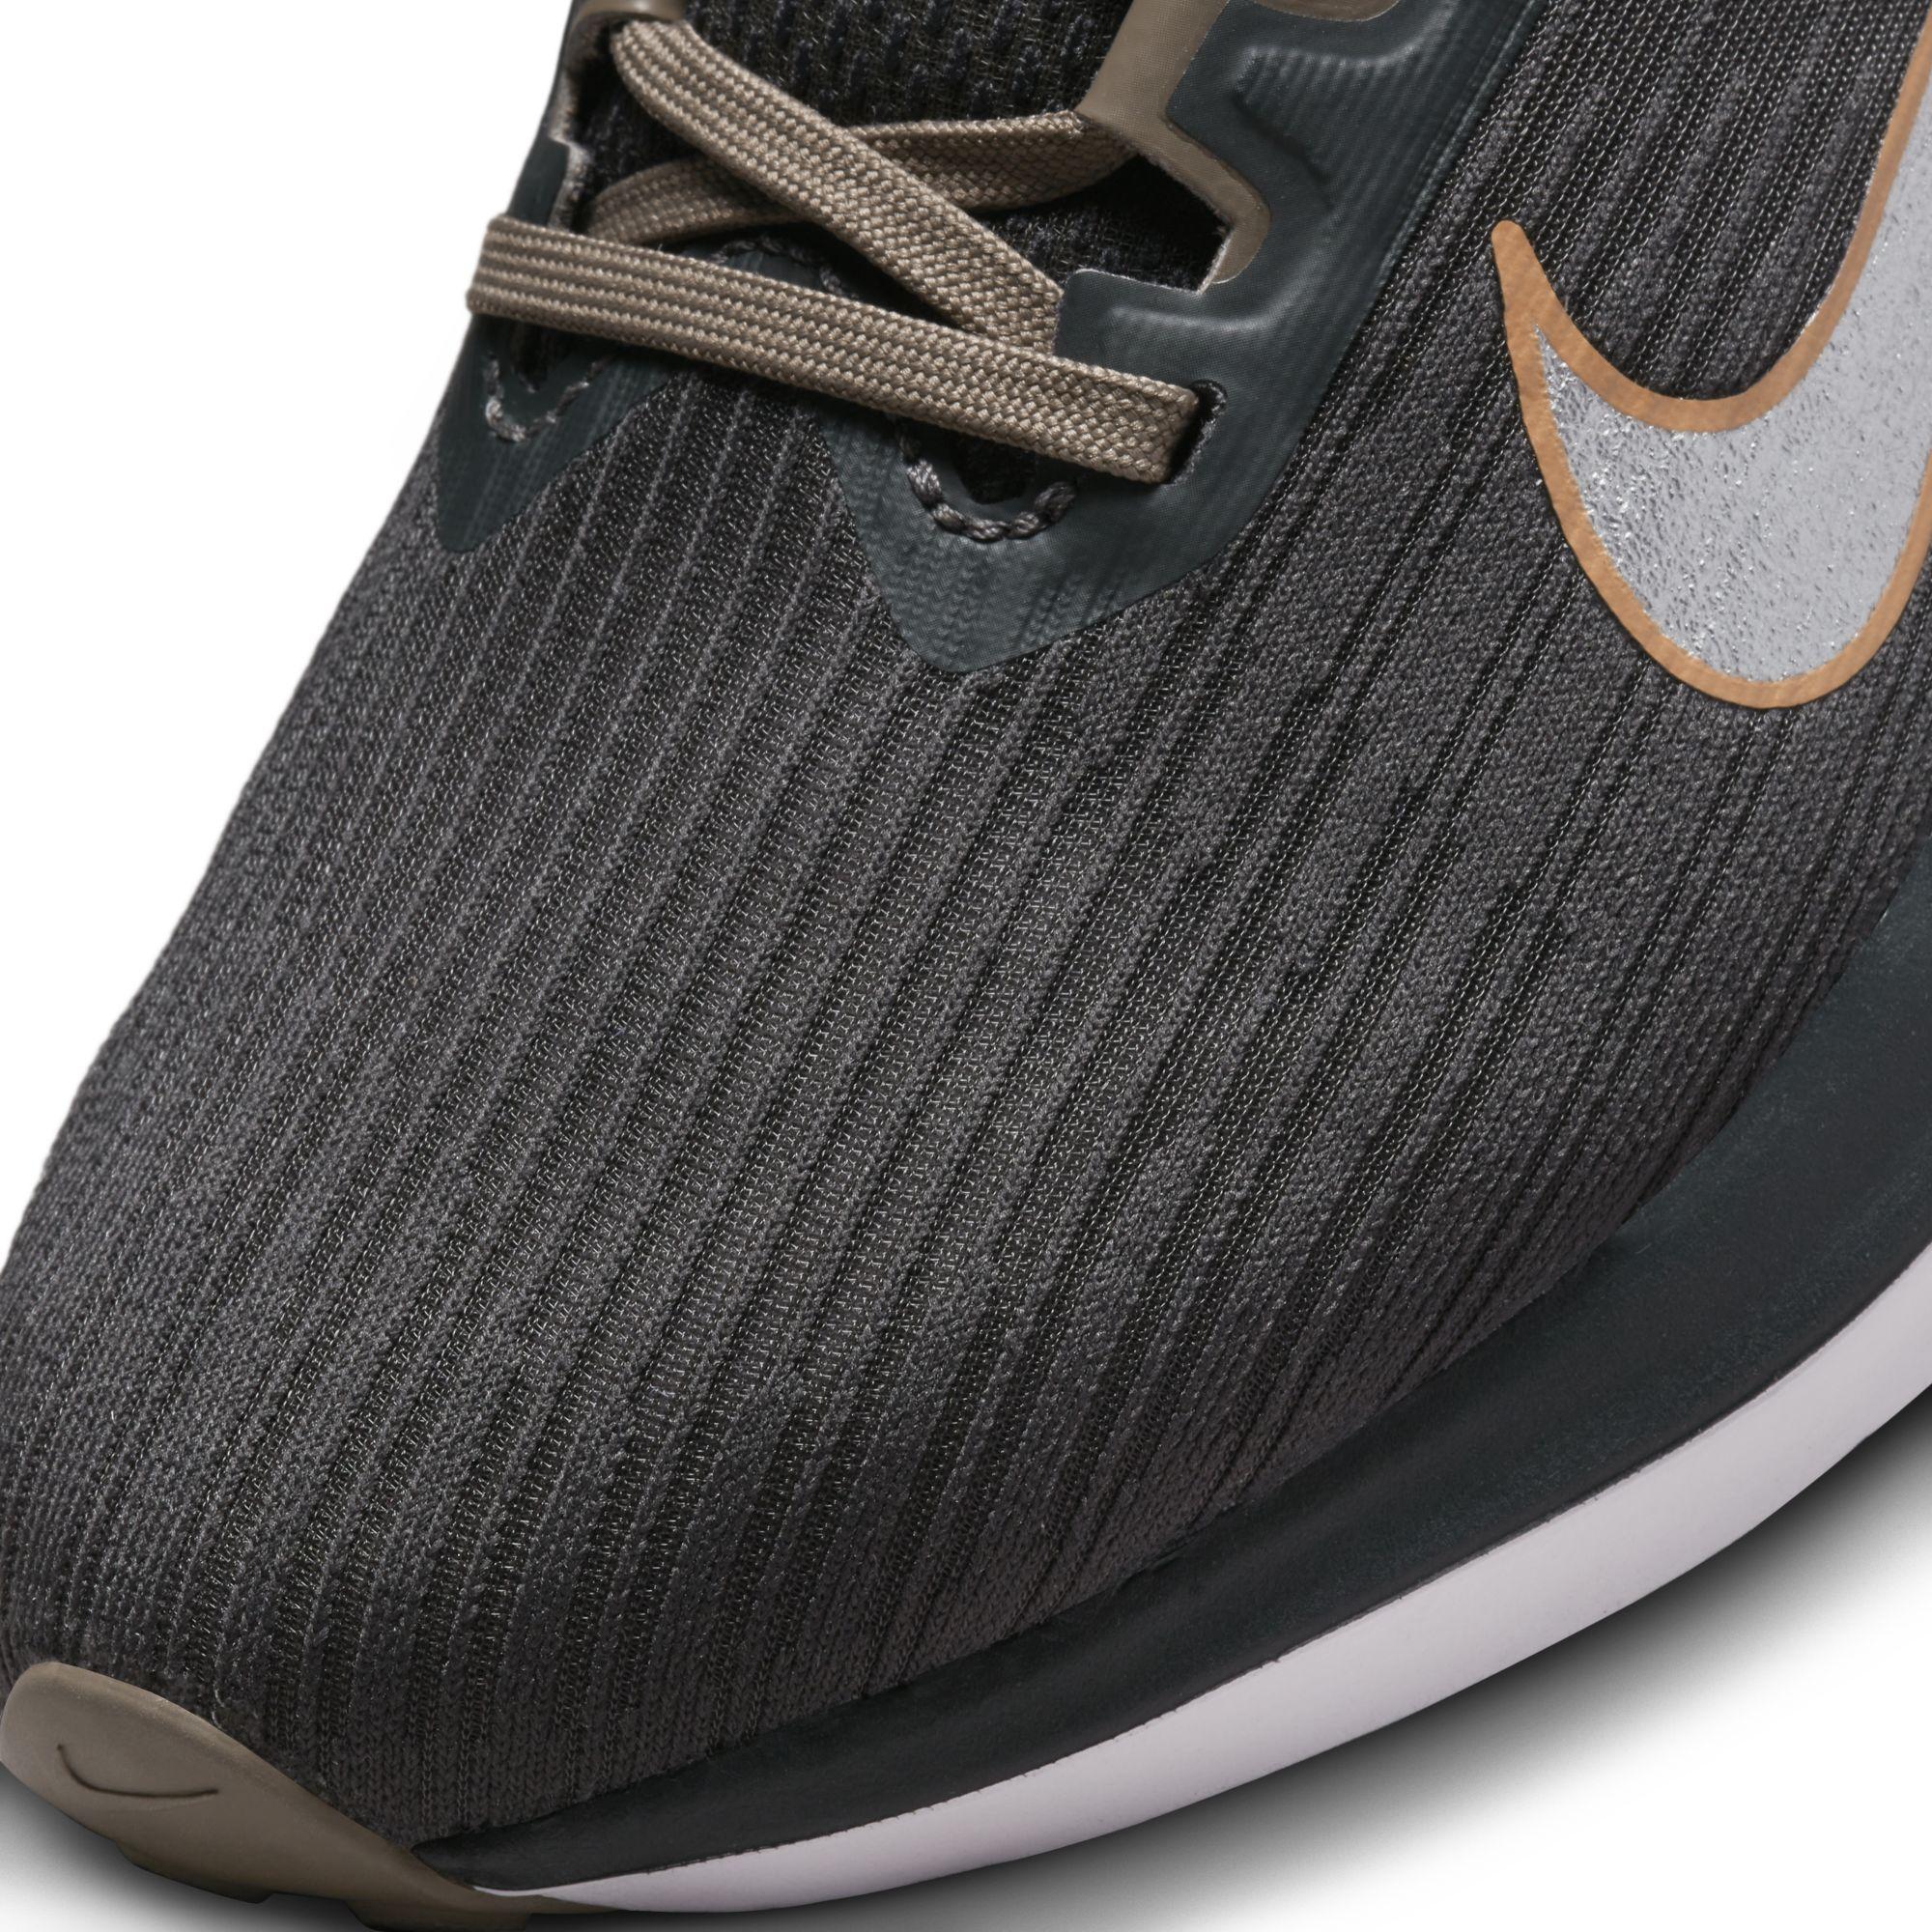 Nike Air Winflo 9 Road Running Shoes in Brown | Lyst